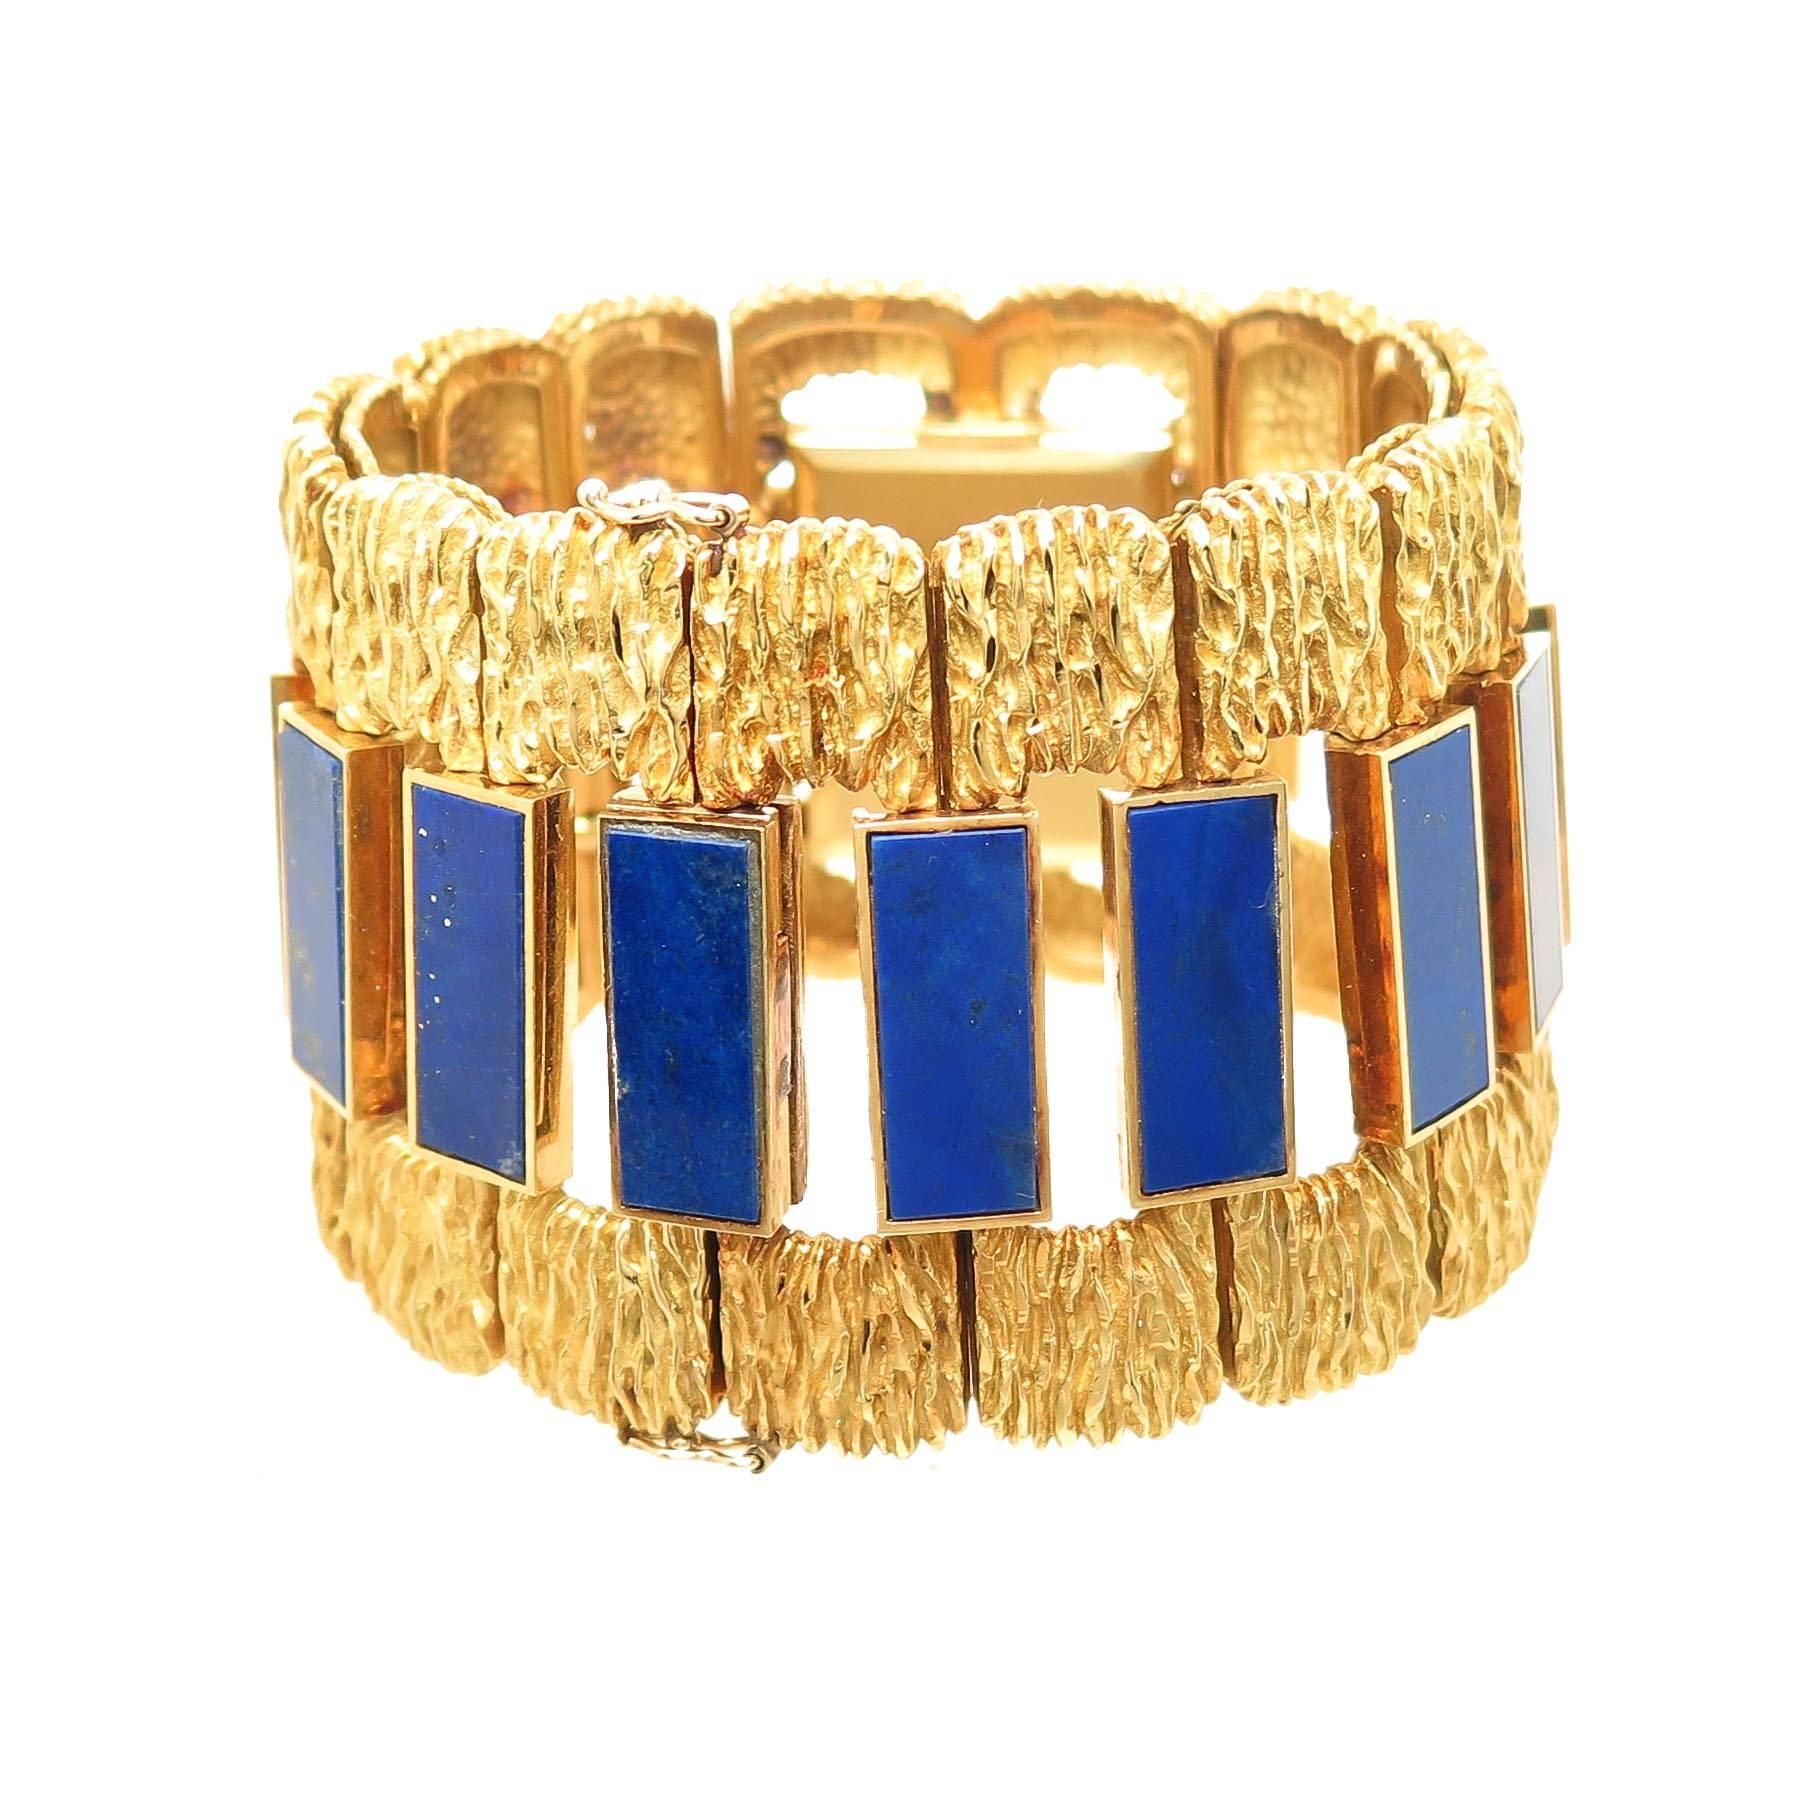 Circa 1970 Ebel 18K Yellow Gold Wrist watch, measuring 6 3/4 inches in length with a slight wrist fitting curve and 1 5/8 inches wide. Set with sections of fine Blue Lapis Lazuli. 17 Jewel Mechanical, Manual wind movement, Lapis Dial. A large and